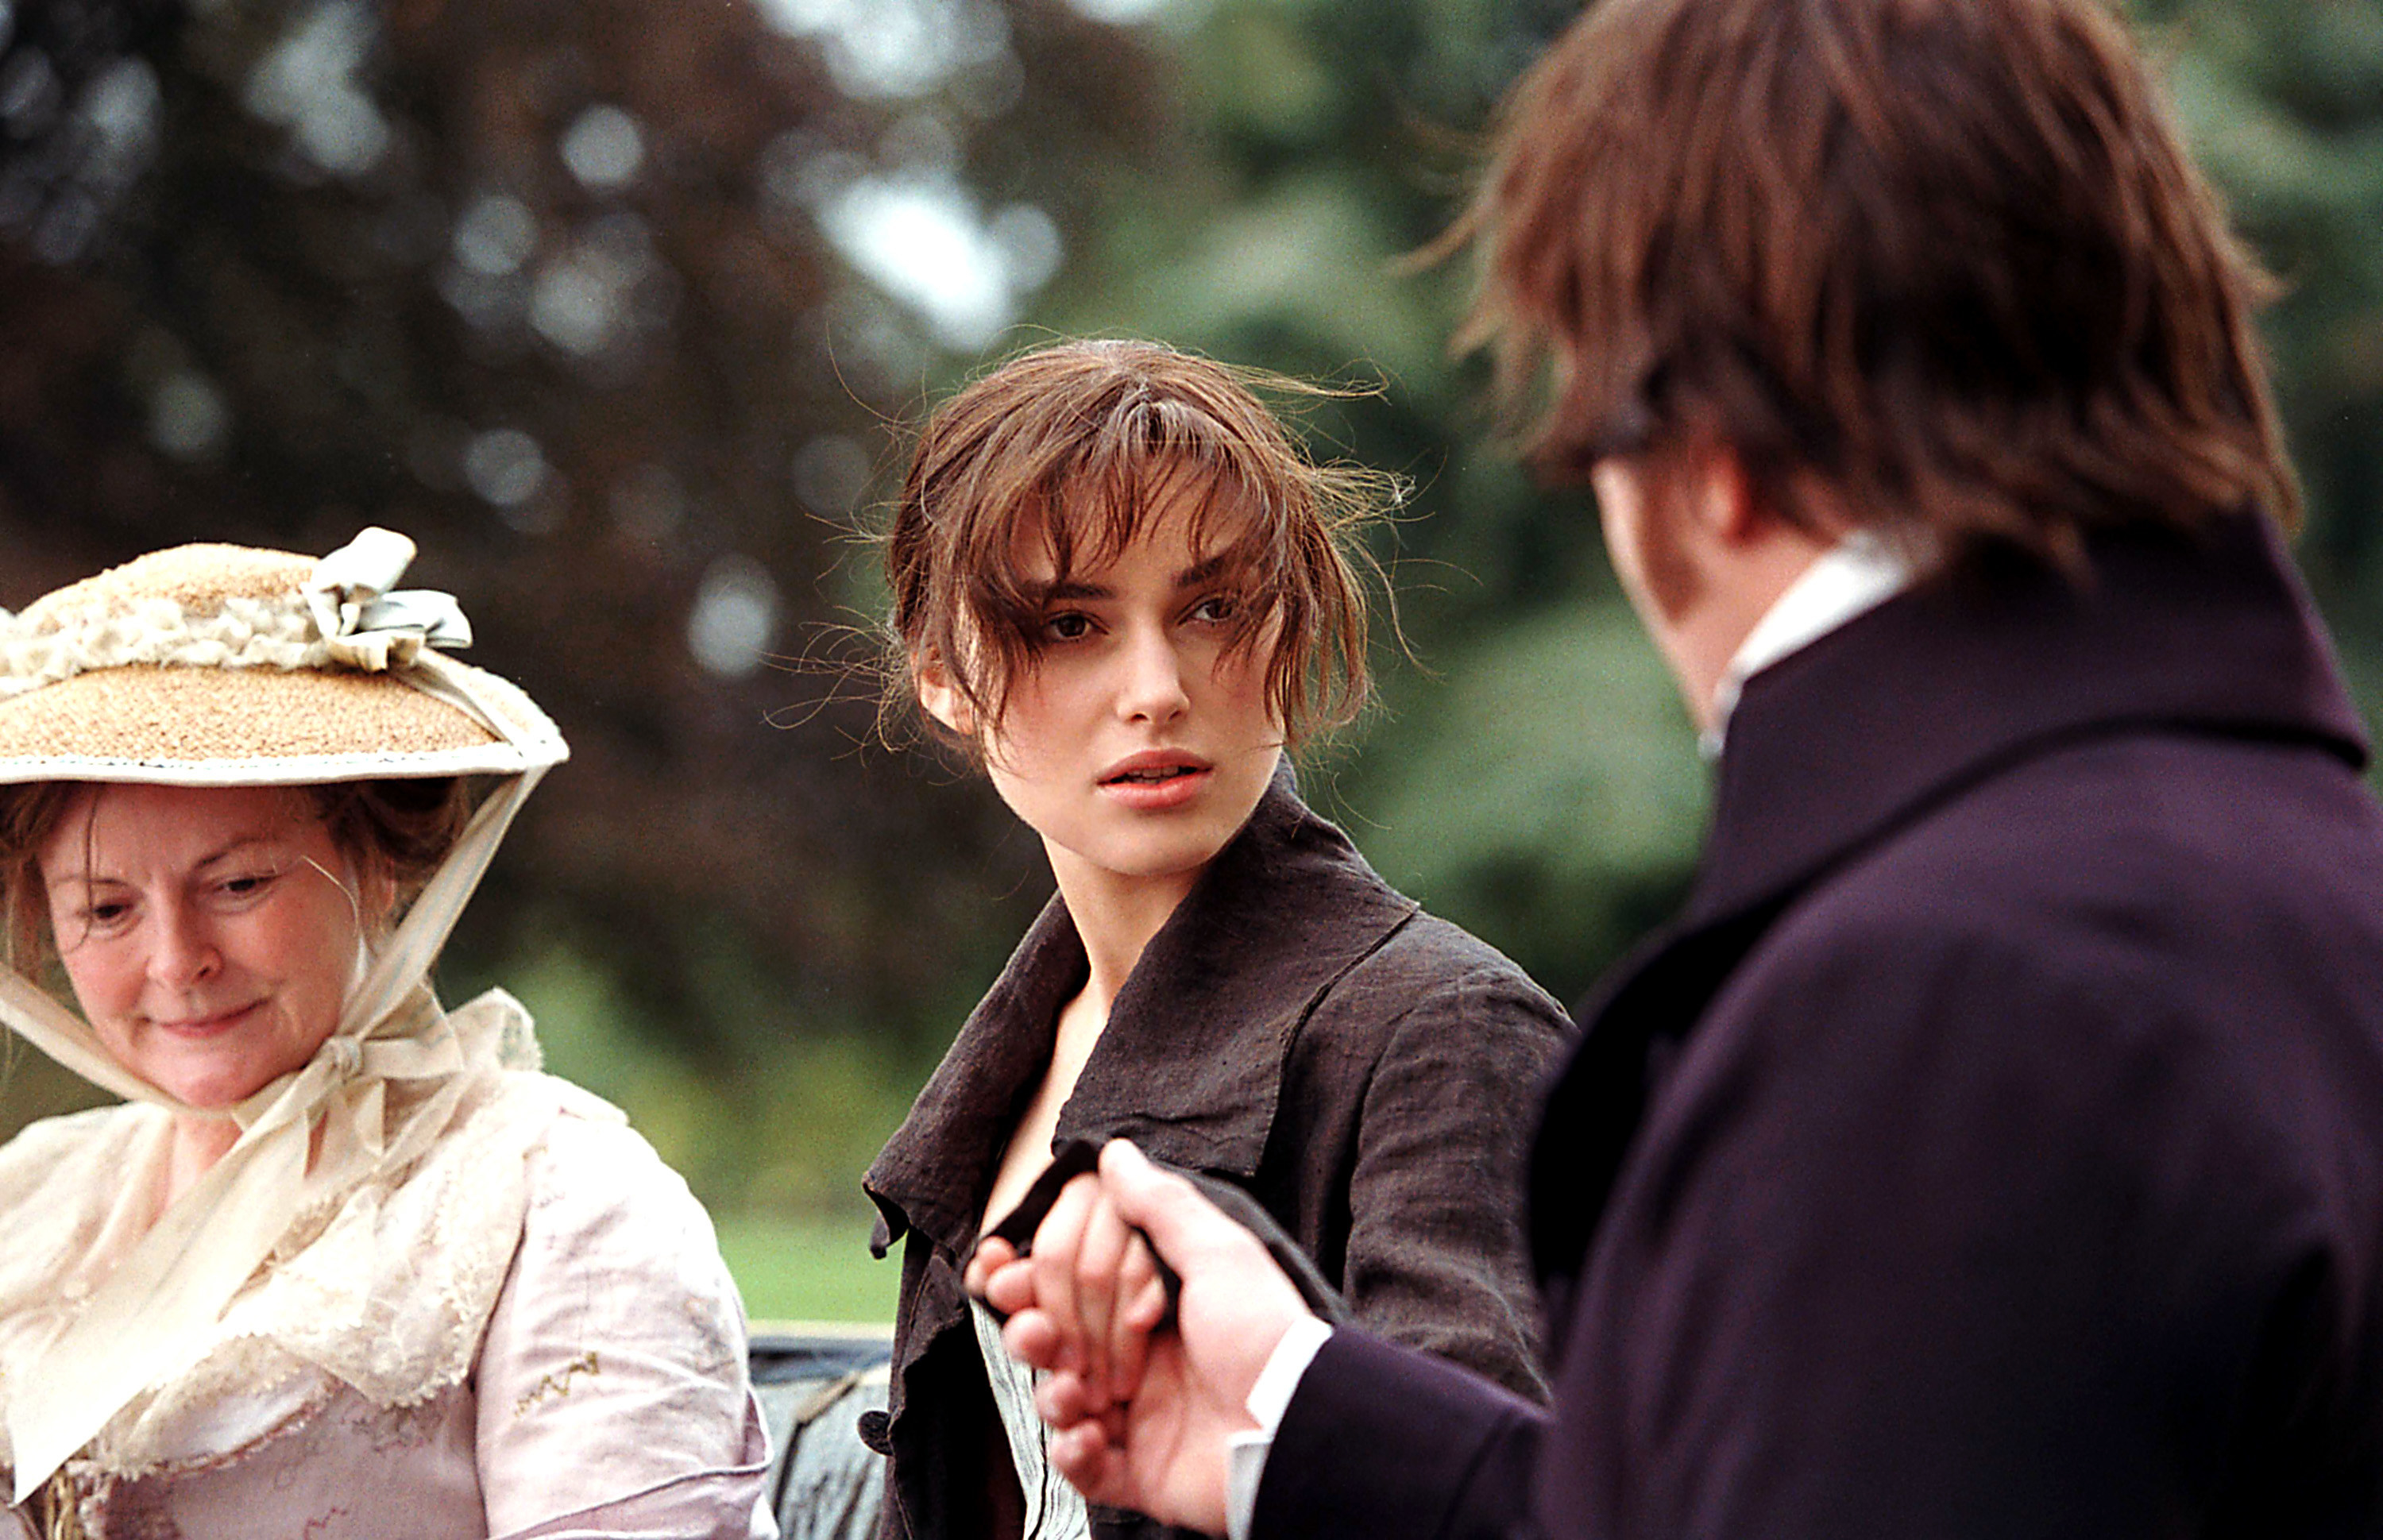 Keira Knightley as Elizabeth Bennet and Matthew Macfadyen as Mr. Darcy in &quot;Pride and Prejudice&quot; 